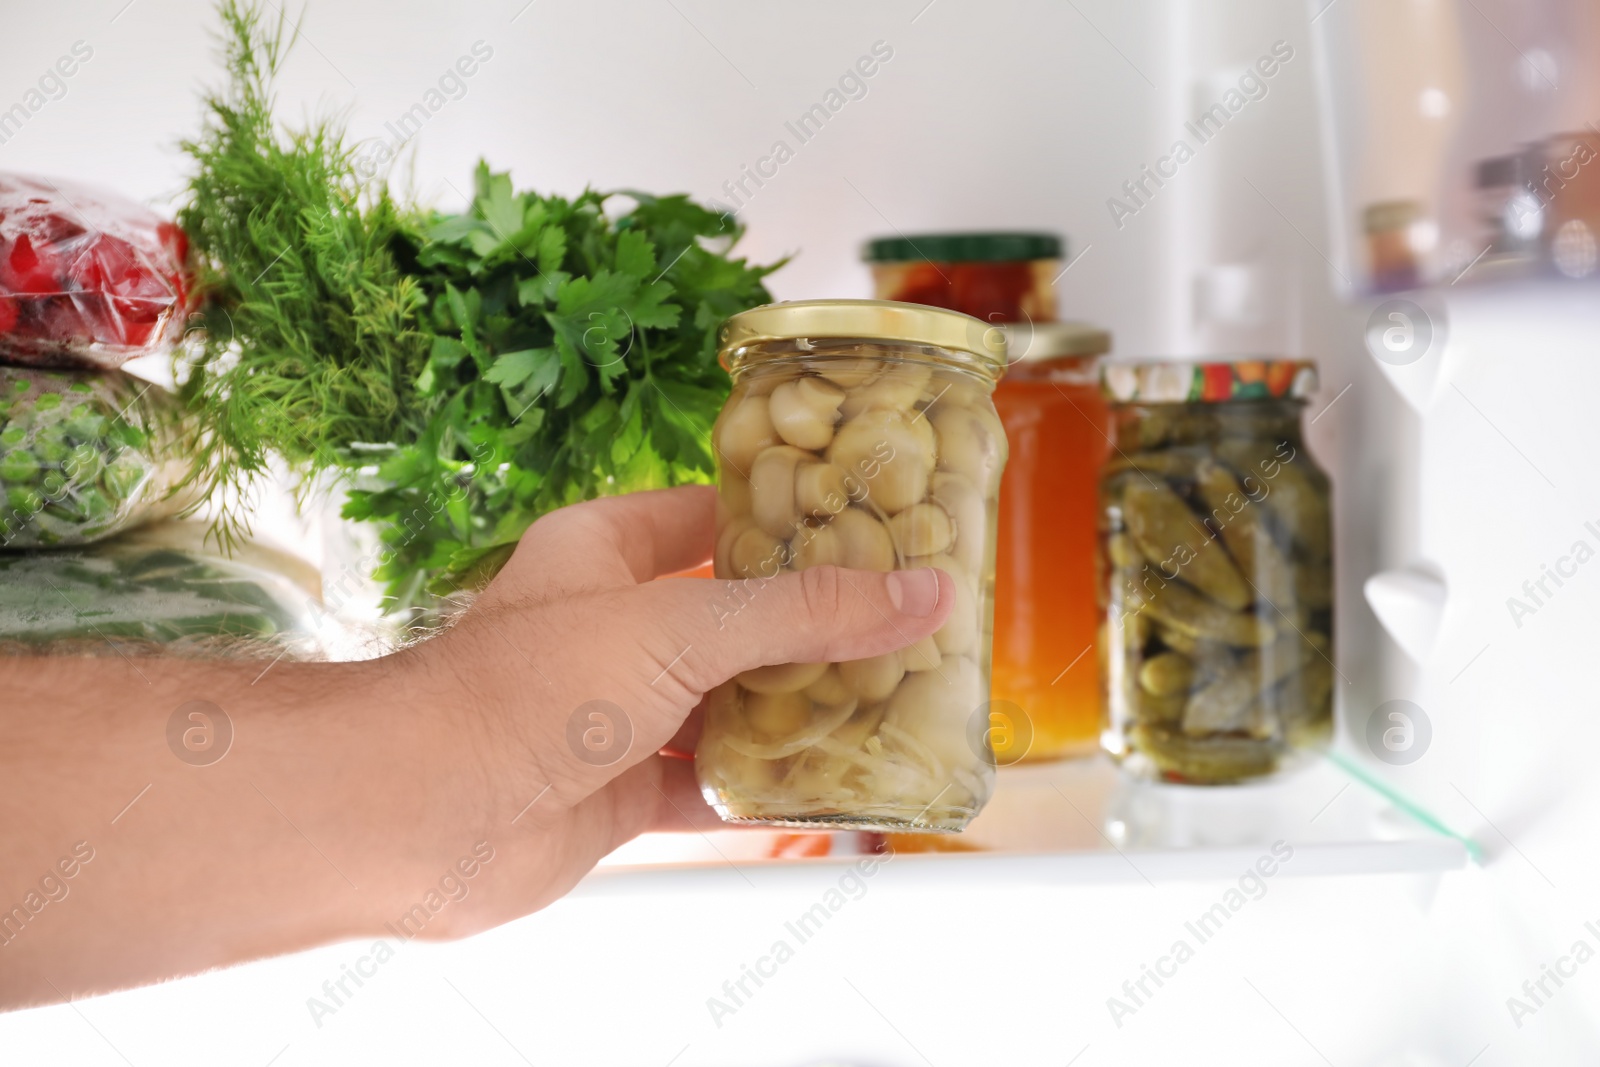 Photo of Man taking jar with mushrooms out of refrigerator in kitchen, closeup